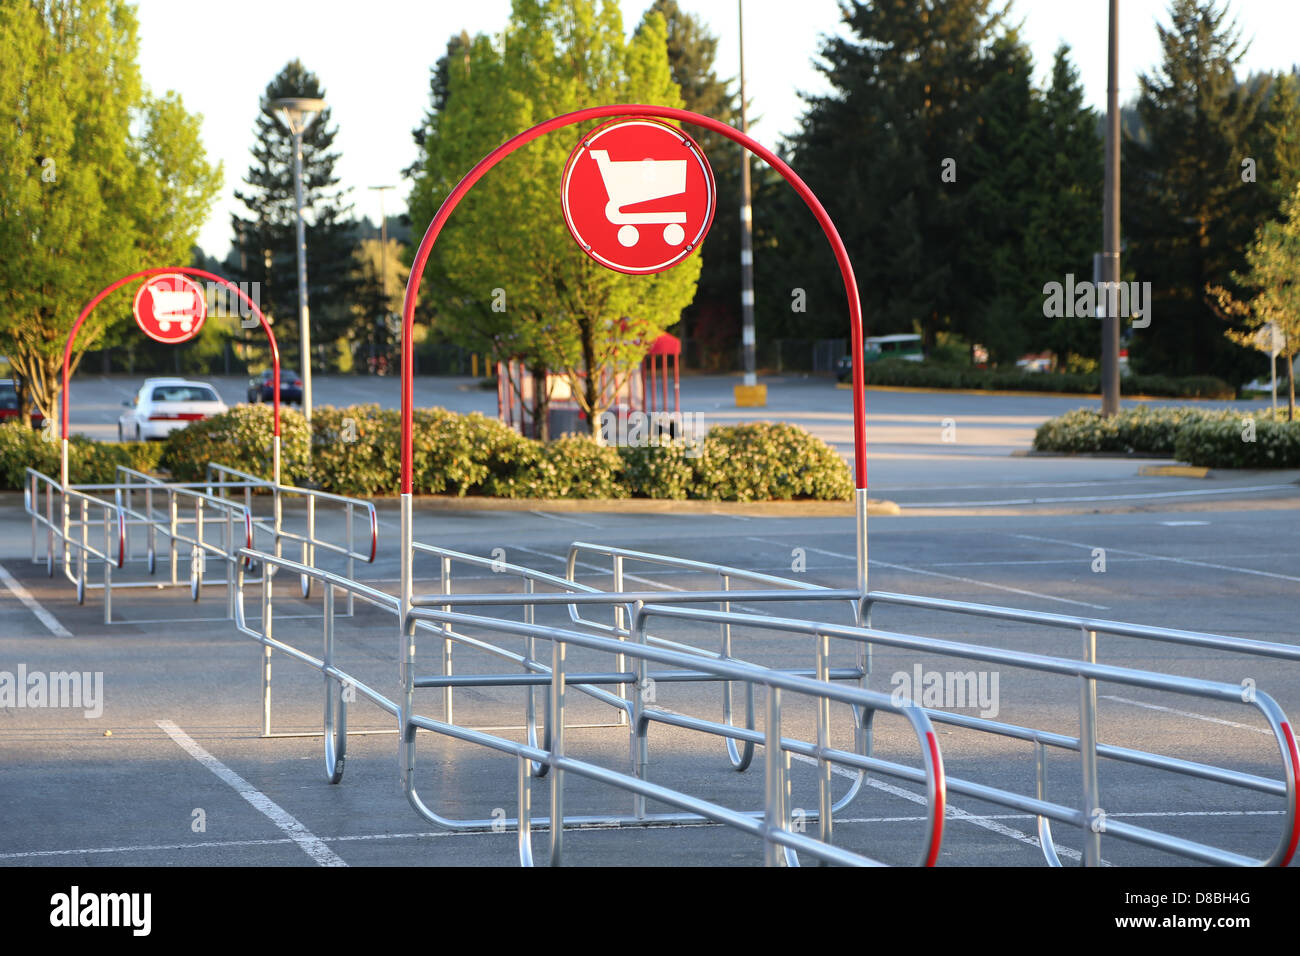 Shopping Cart Signs in the Parking Lot Stock Photo